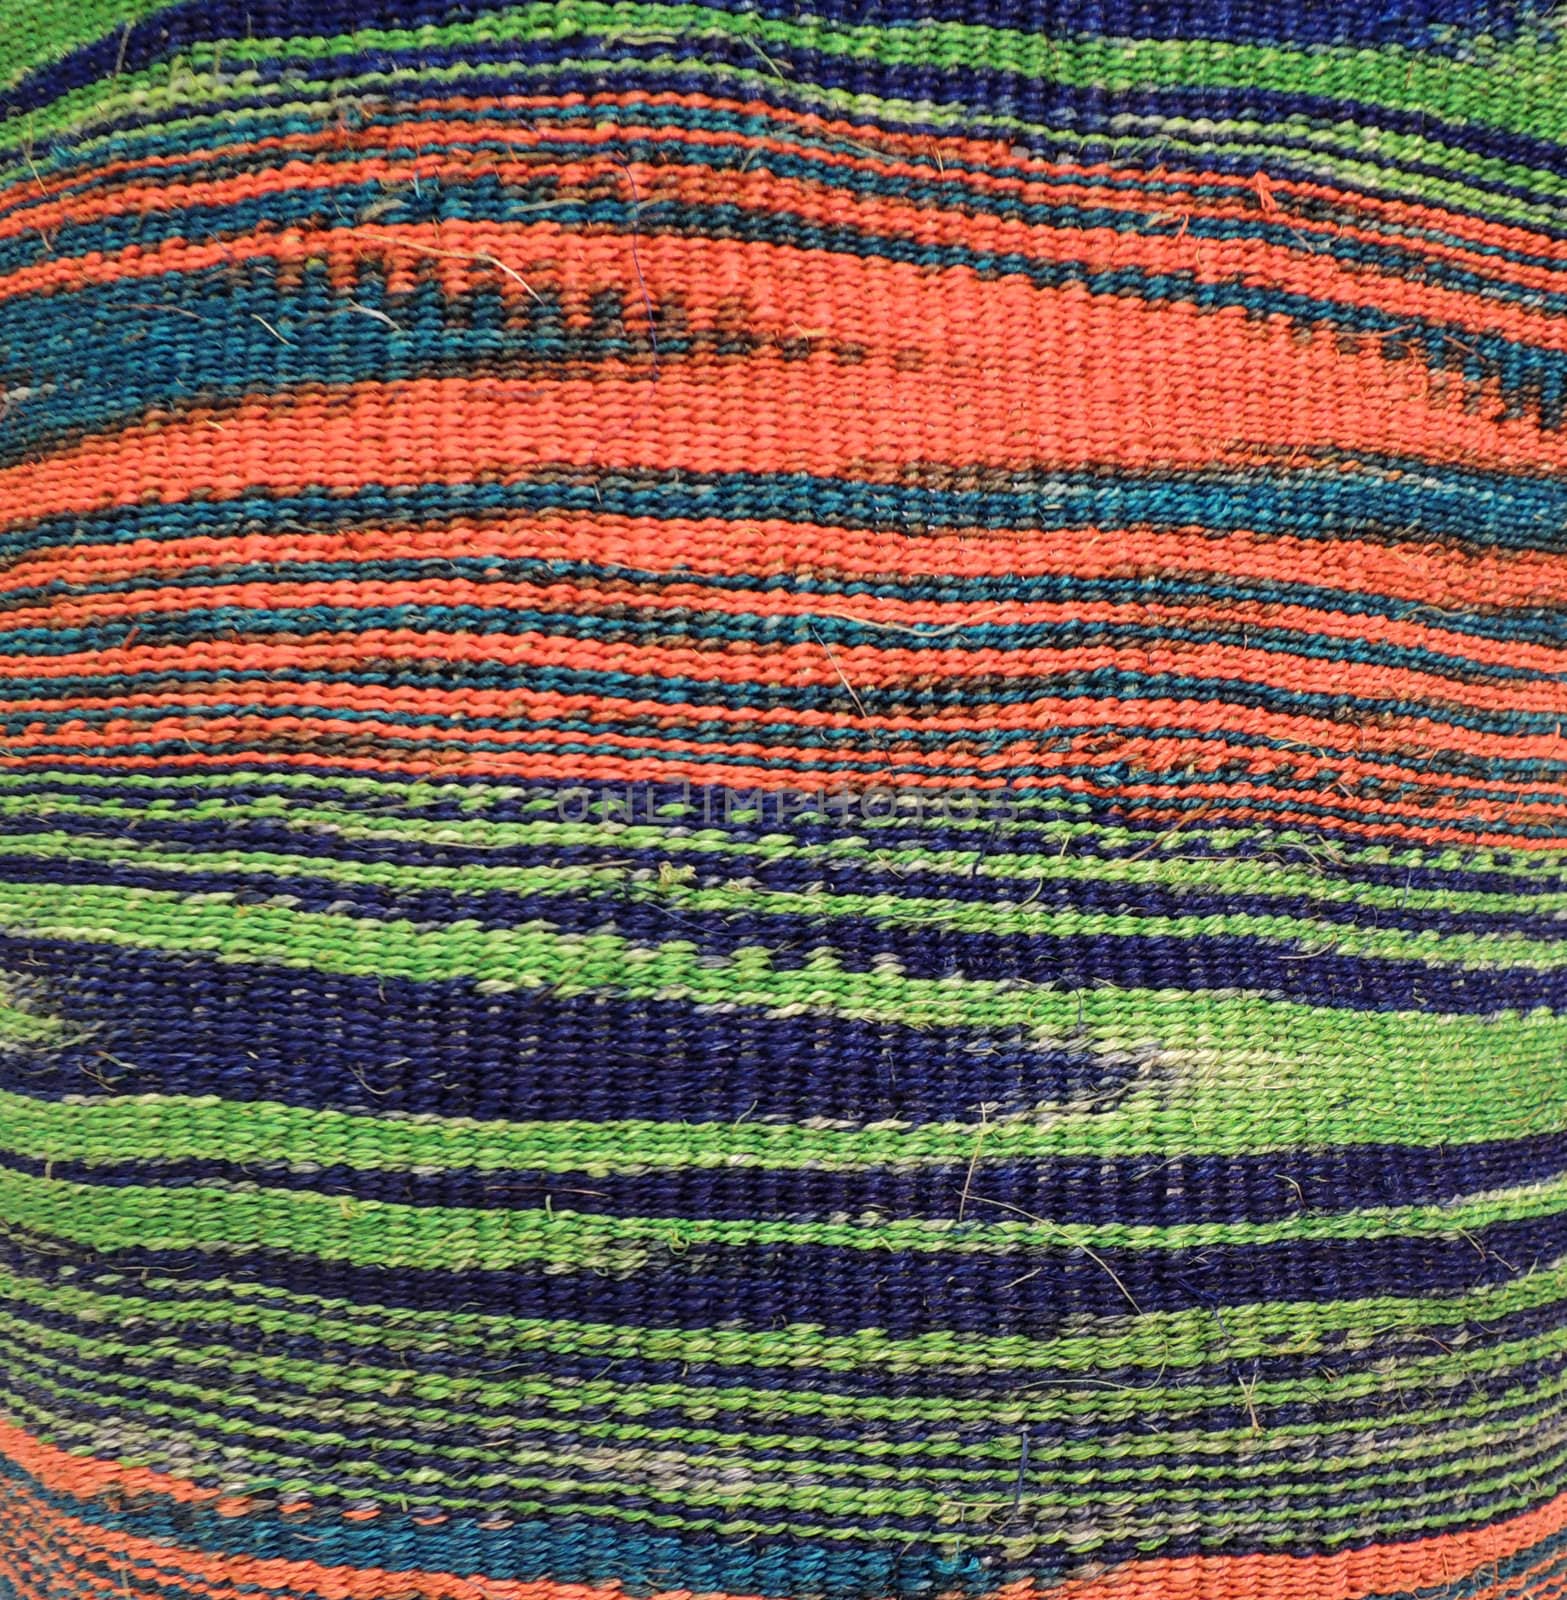 Anstract colorful knit texture